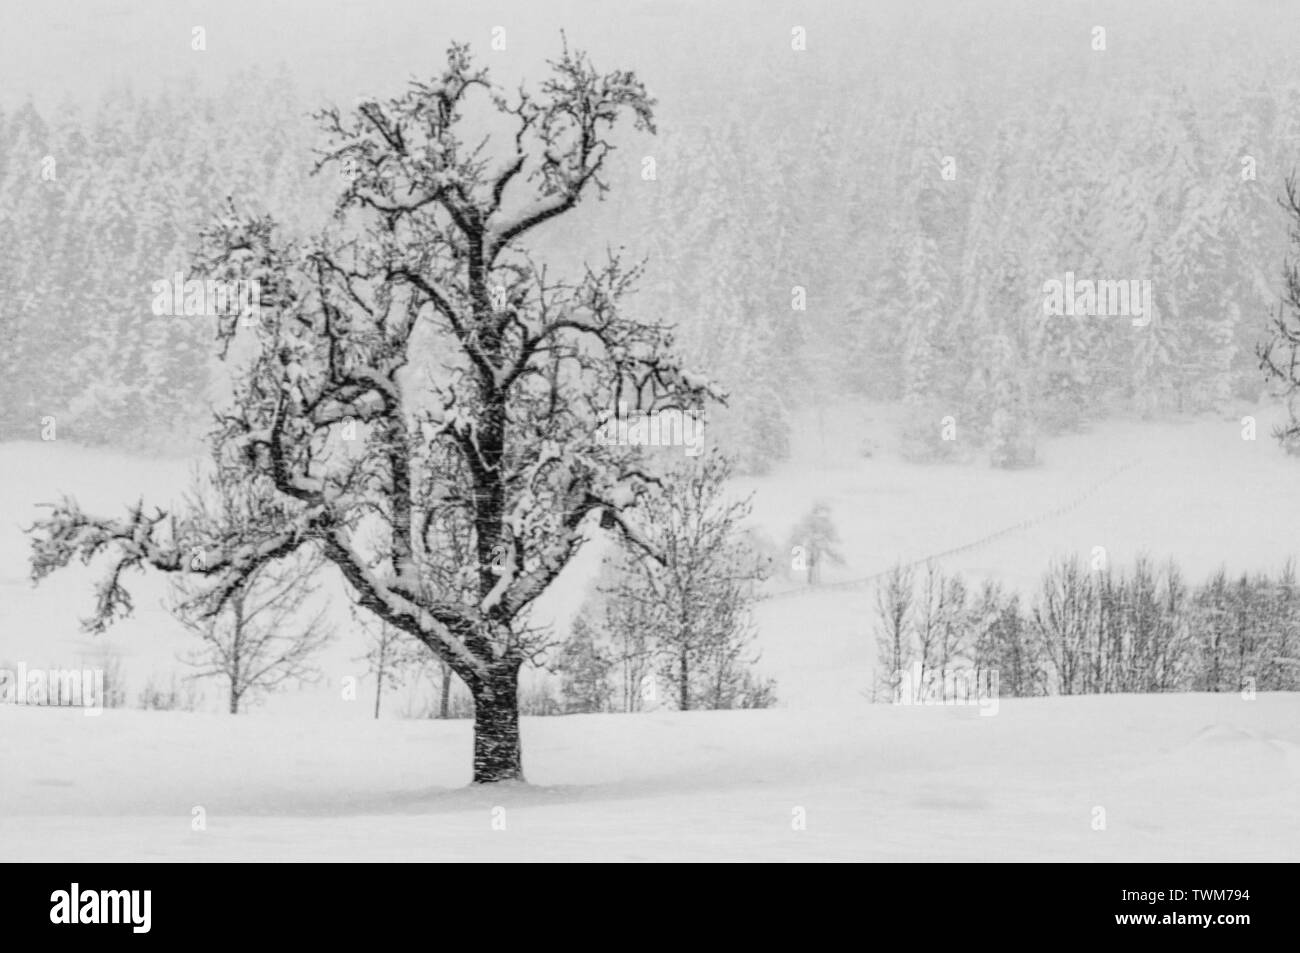 A lone tree covered with snow is standing whereas heavy snowfall in Germany almost made the other trees invisible. A B&W artistic impression. Stock Photo